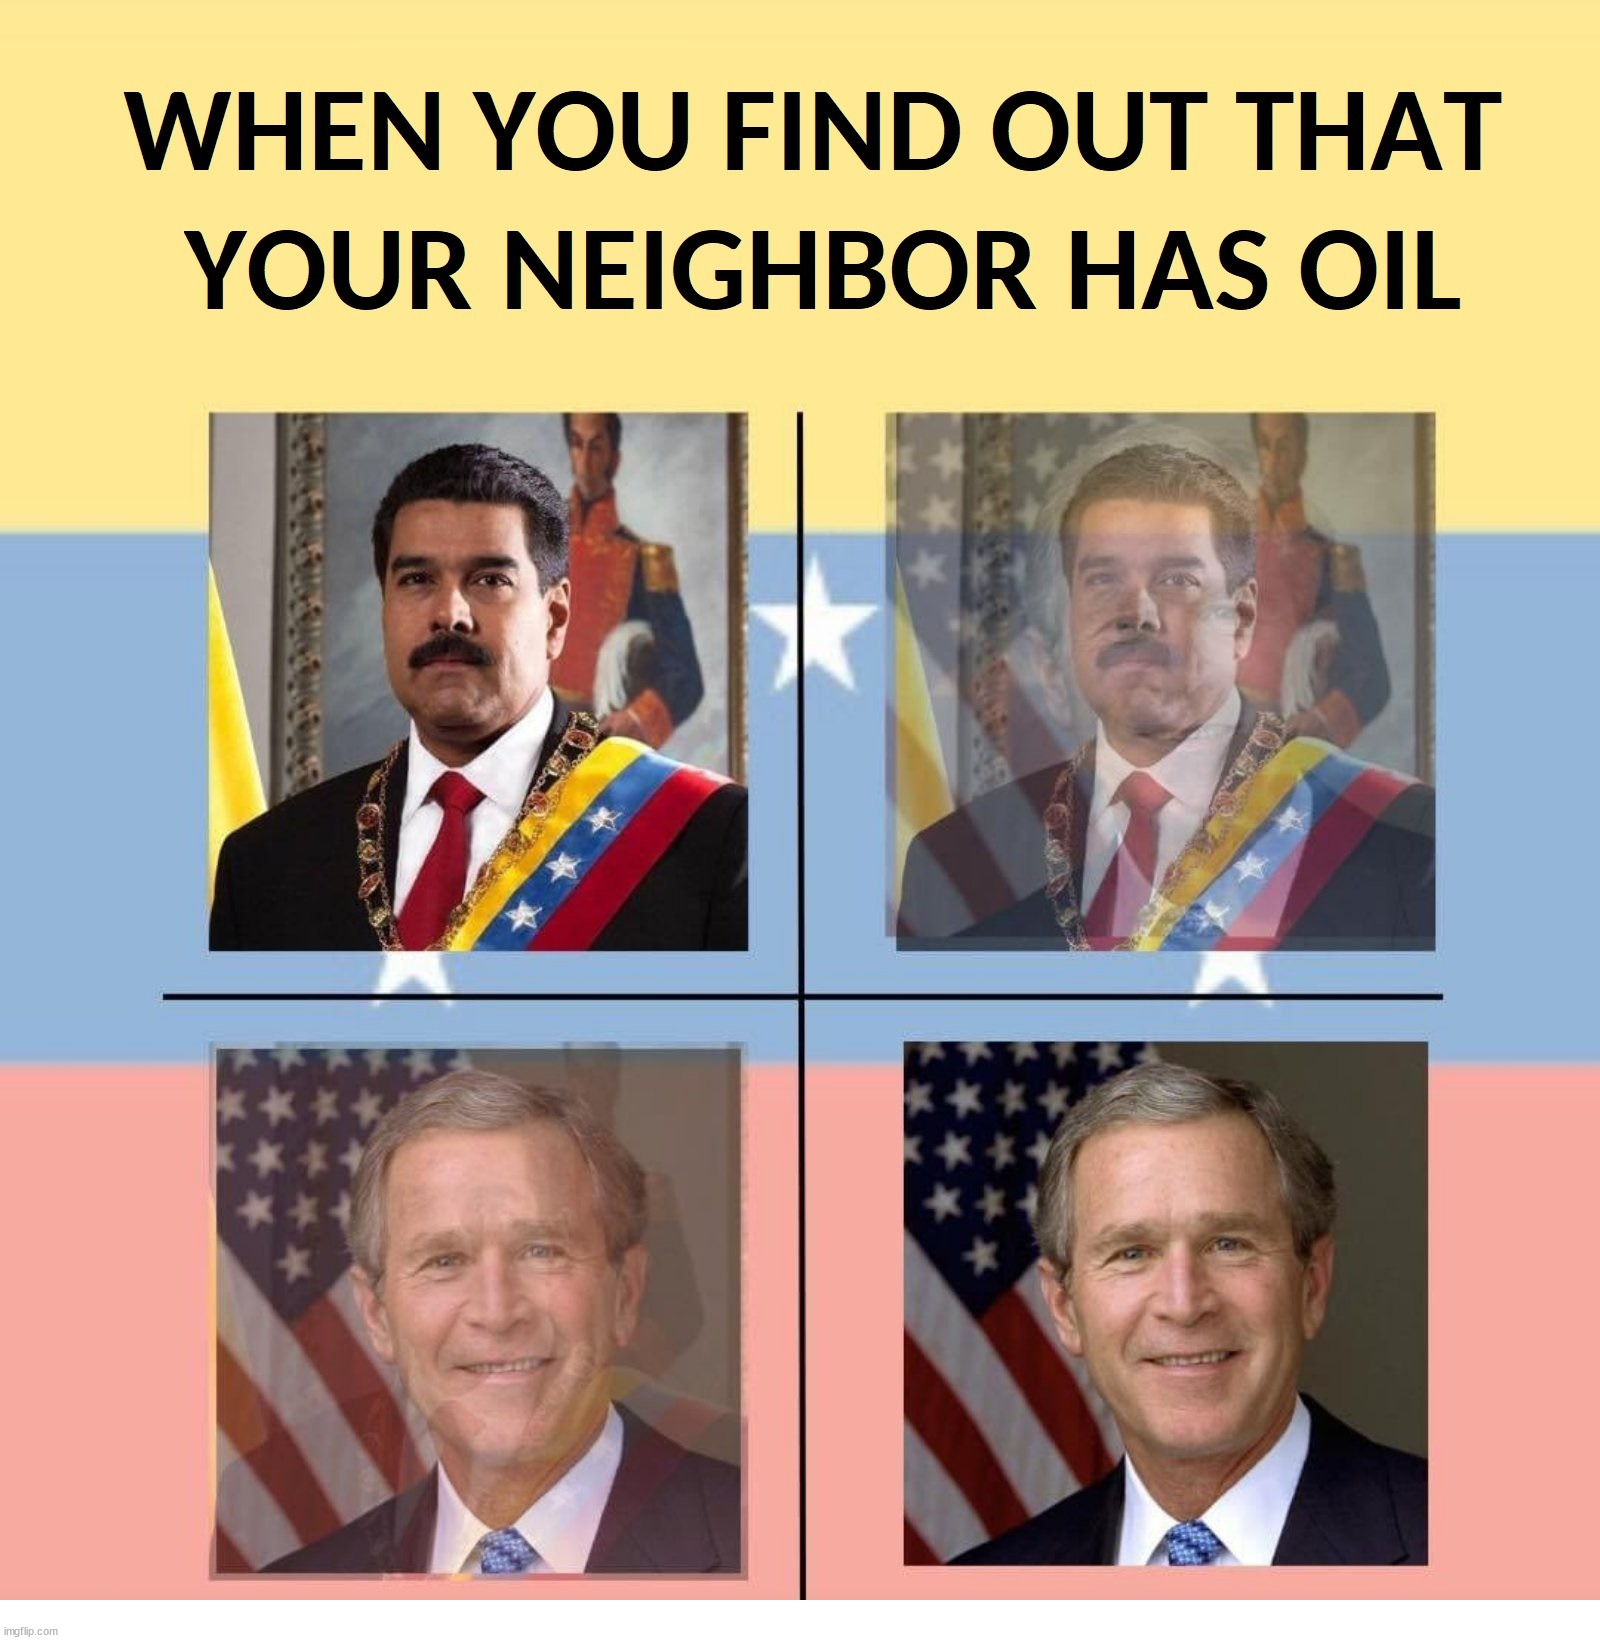 When you find out that your neighbor has oil | image tagged in george bush,neighbor,oil,venezuela,guyana,nicolas maduro | made w/ Imgflip meme maker